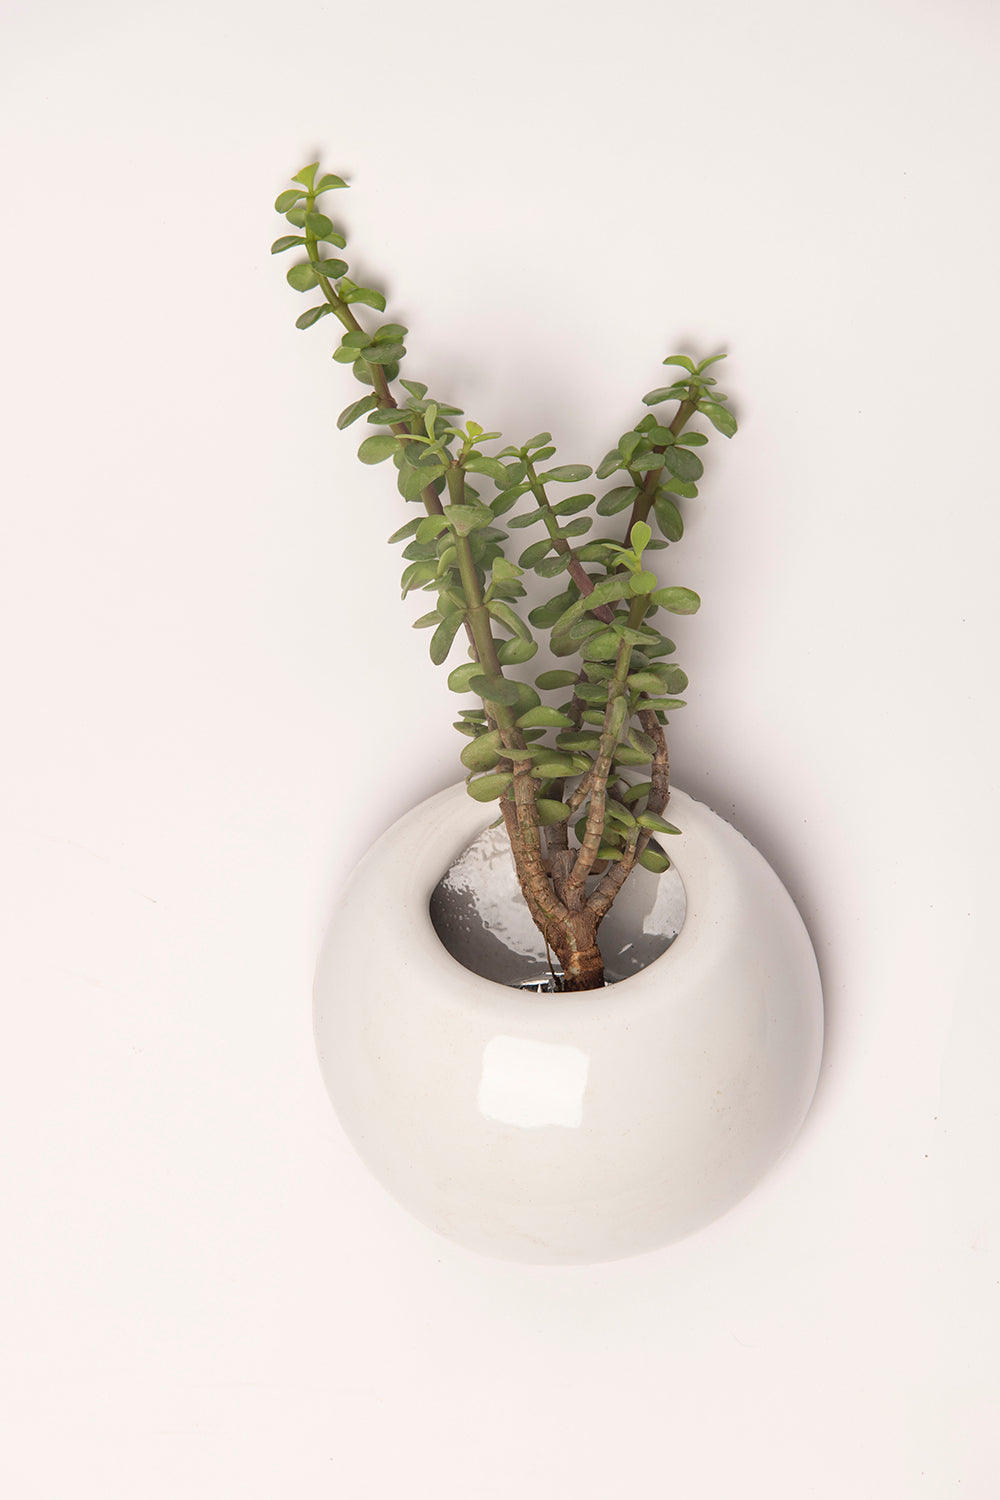 Extra Small size circular Hanging Solitaires Wall mountain planter in white color with  Portulacaria Afra plant